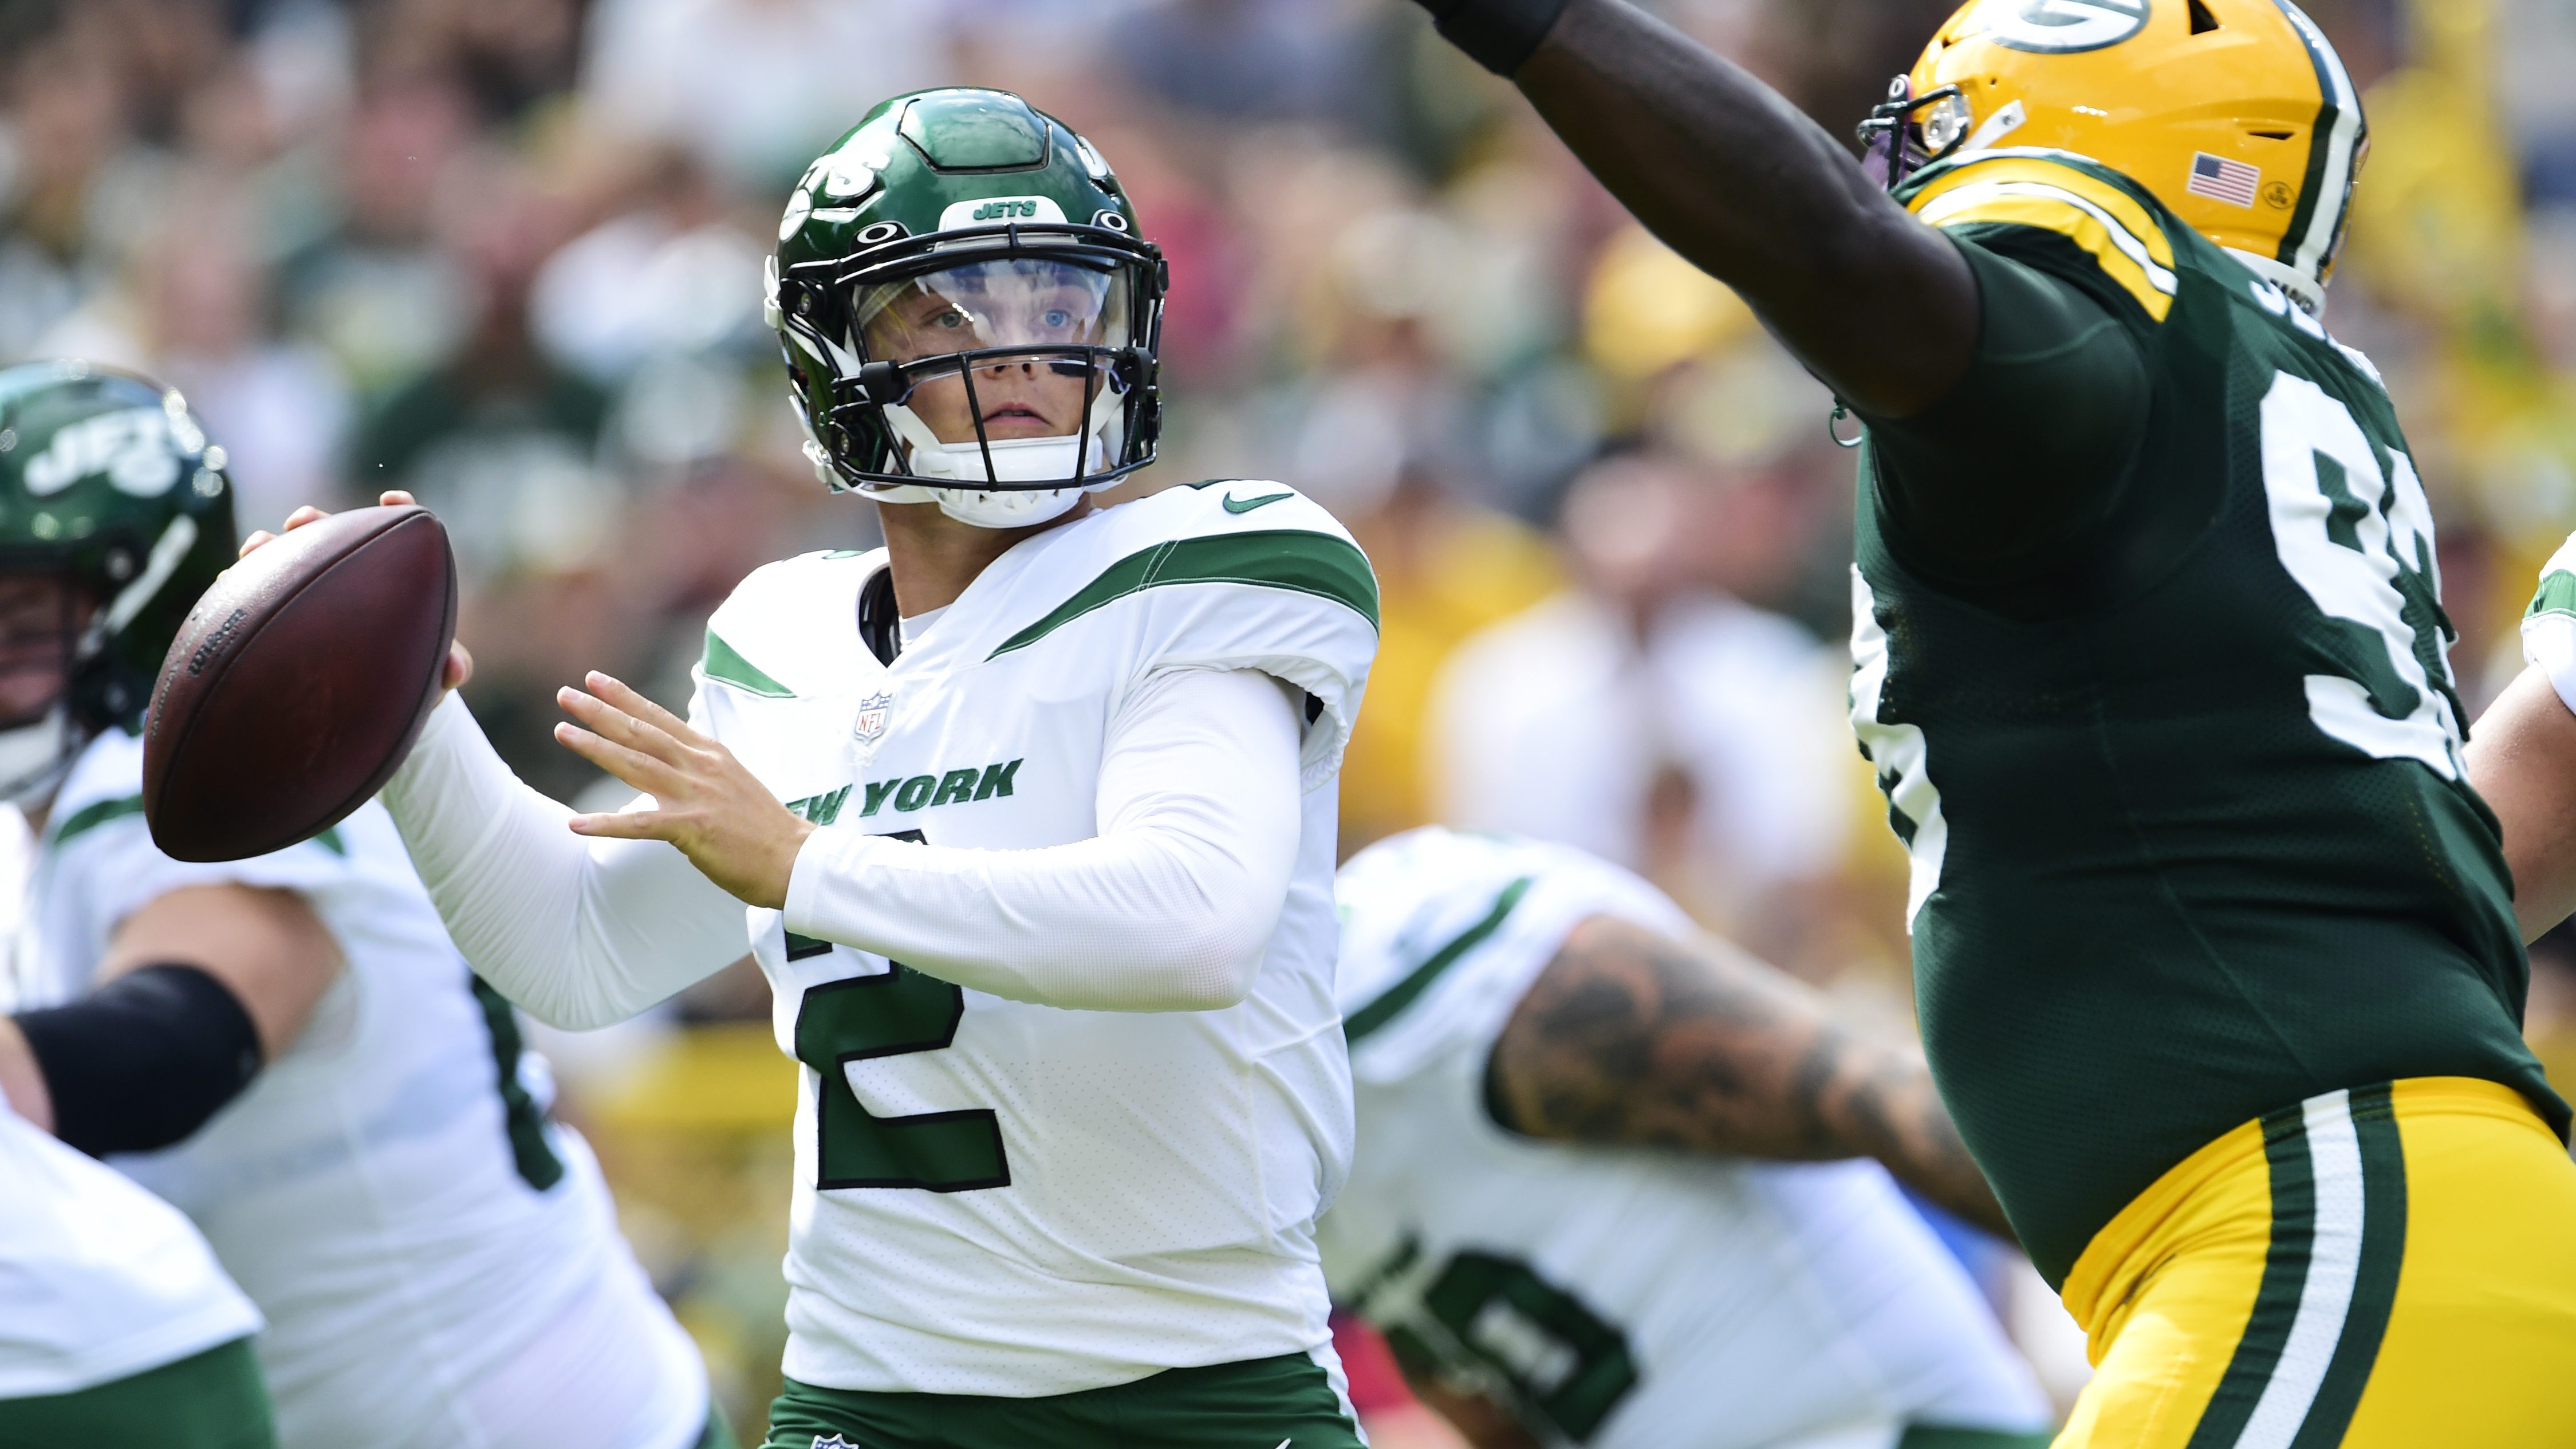 Zach Wilson Among Top Values in Fantasy Football, Several Jets Worth ...